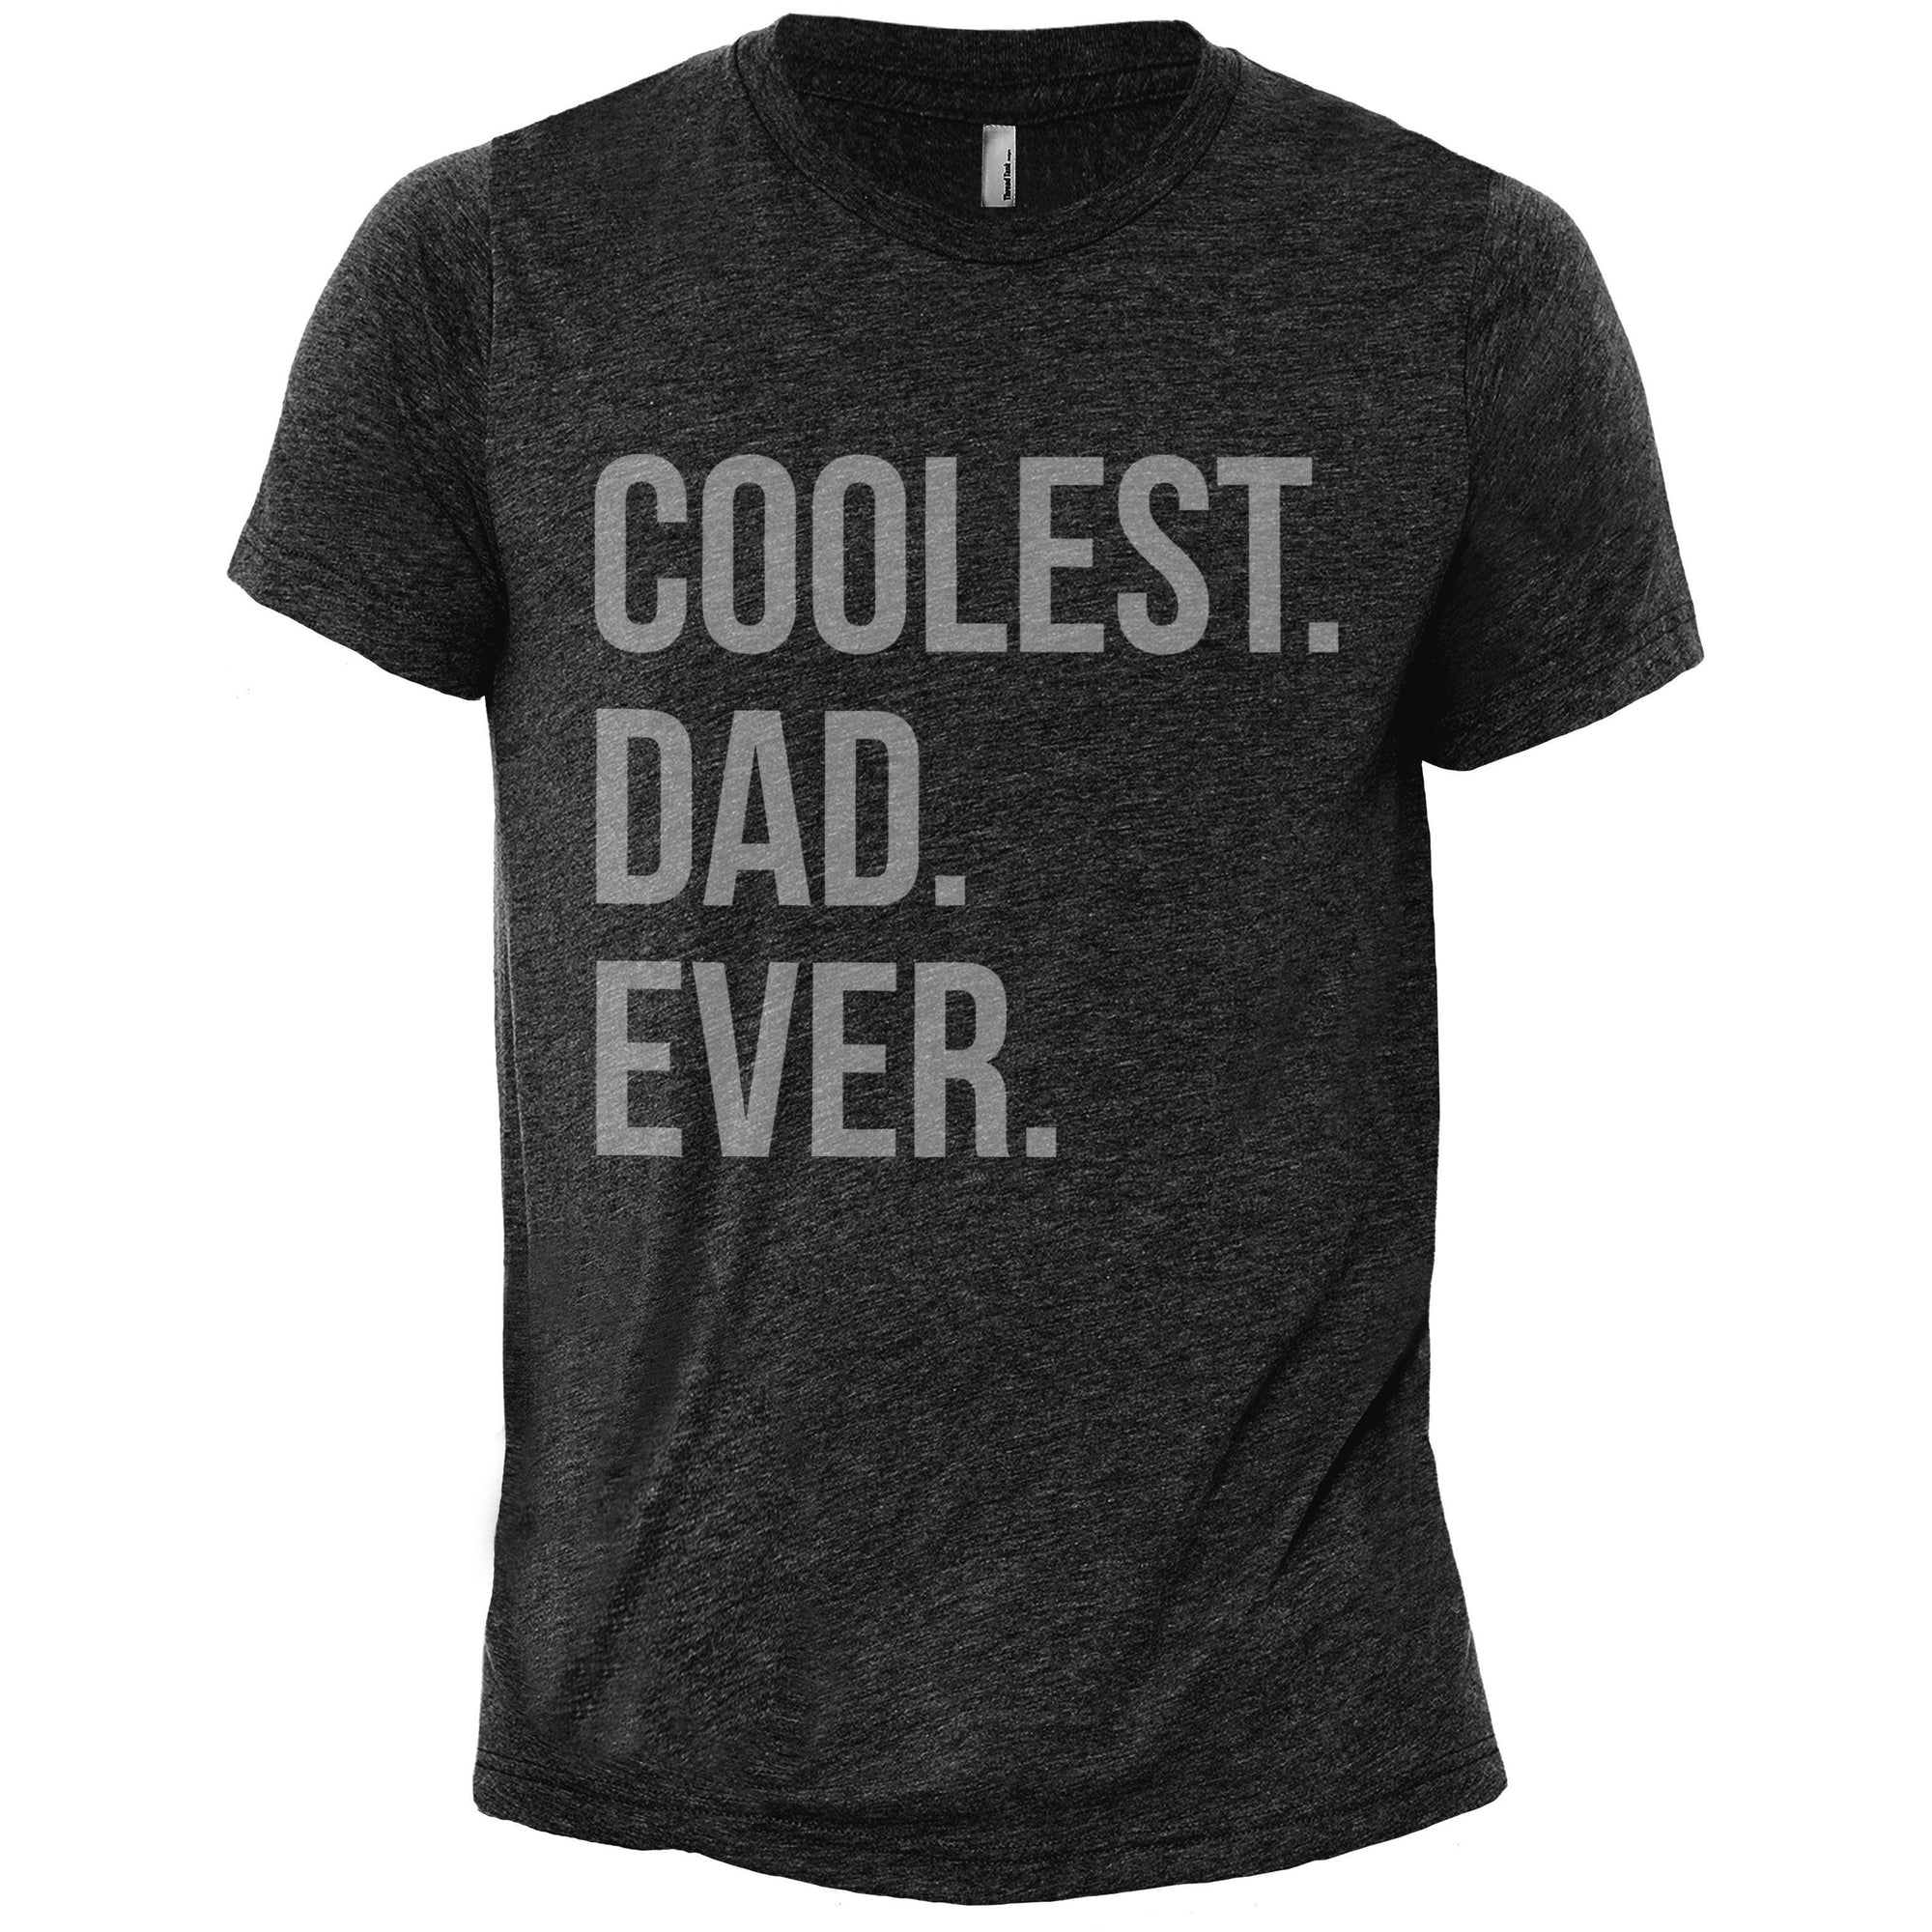 Coolest Dad Ever Heather Grey Printed Graphic Men's Crew T-Shirt Tee